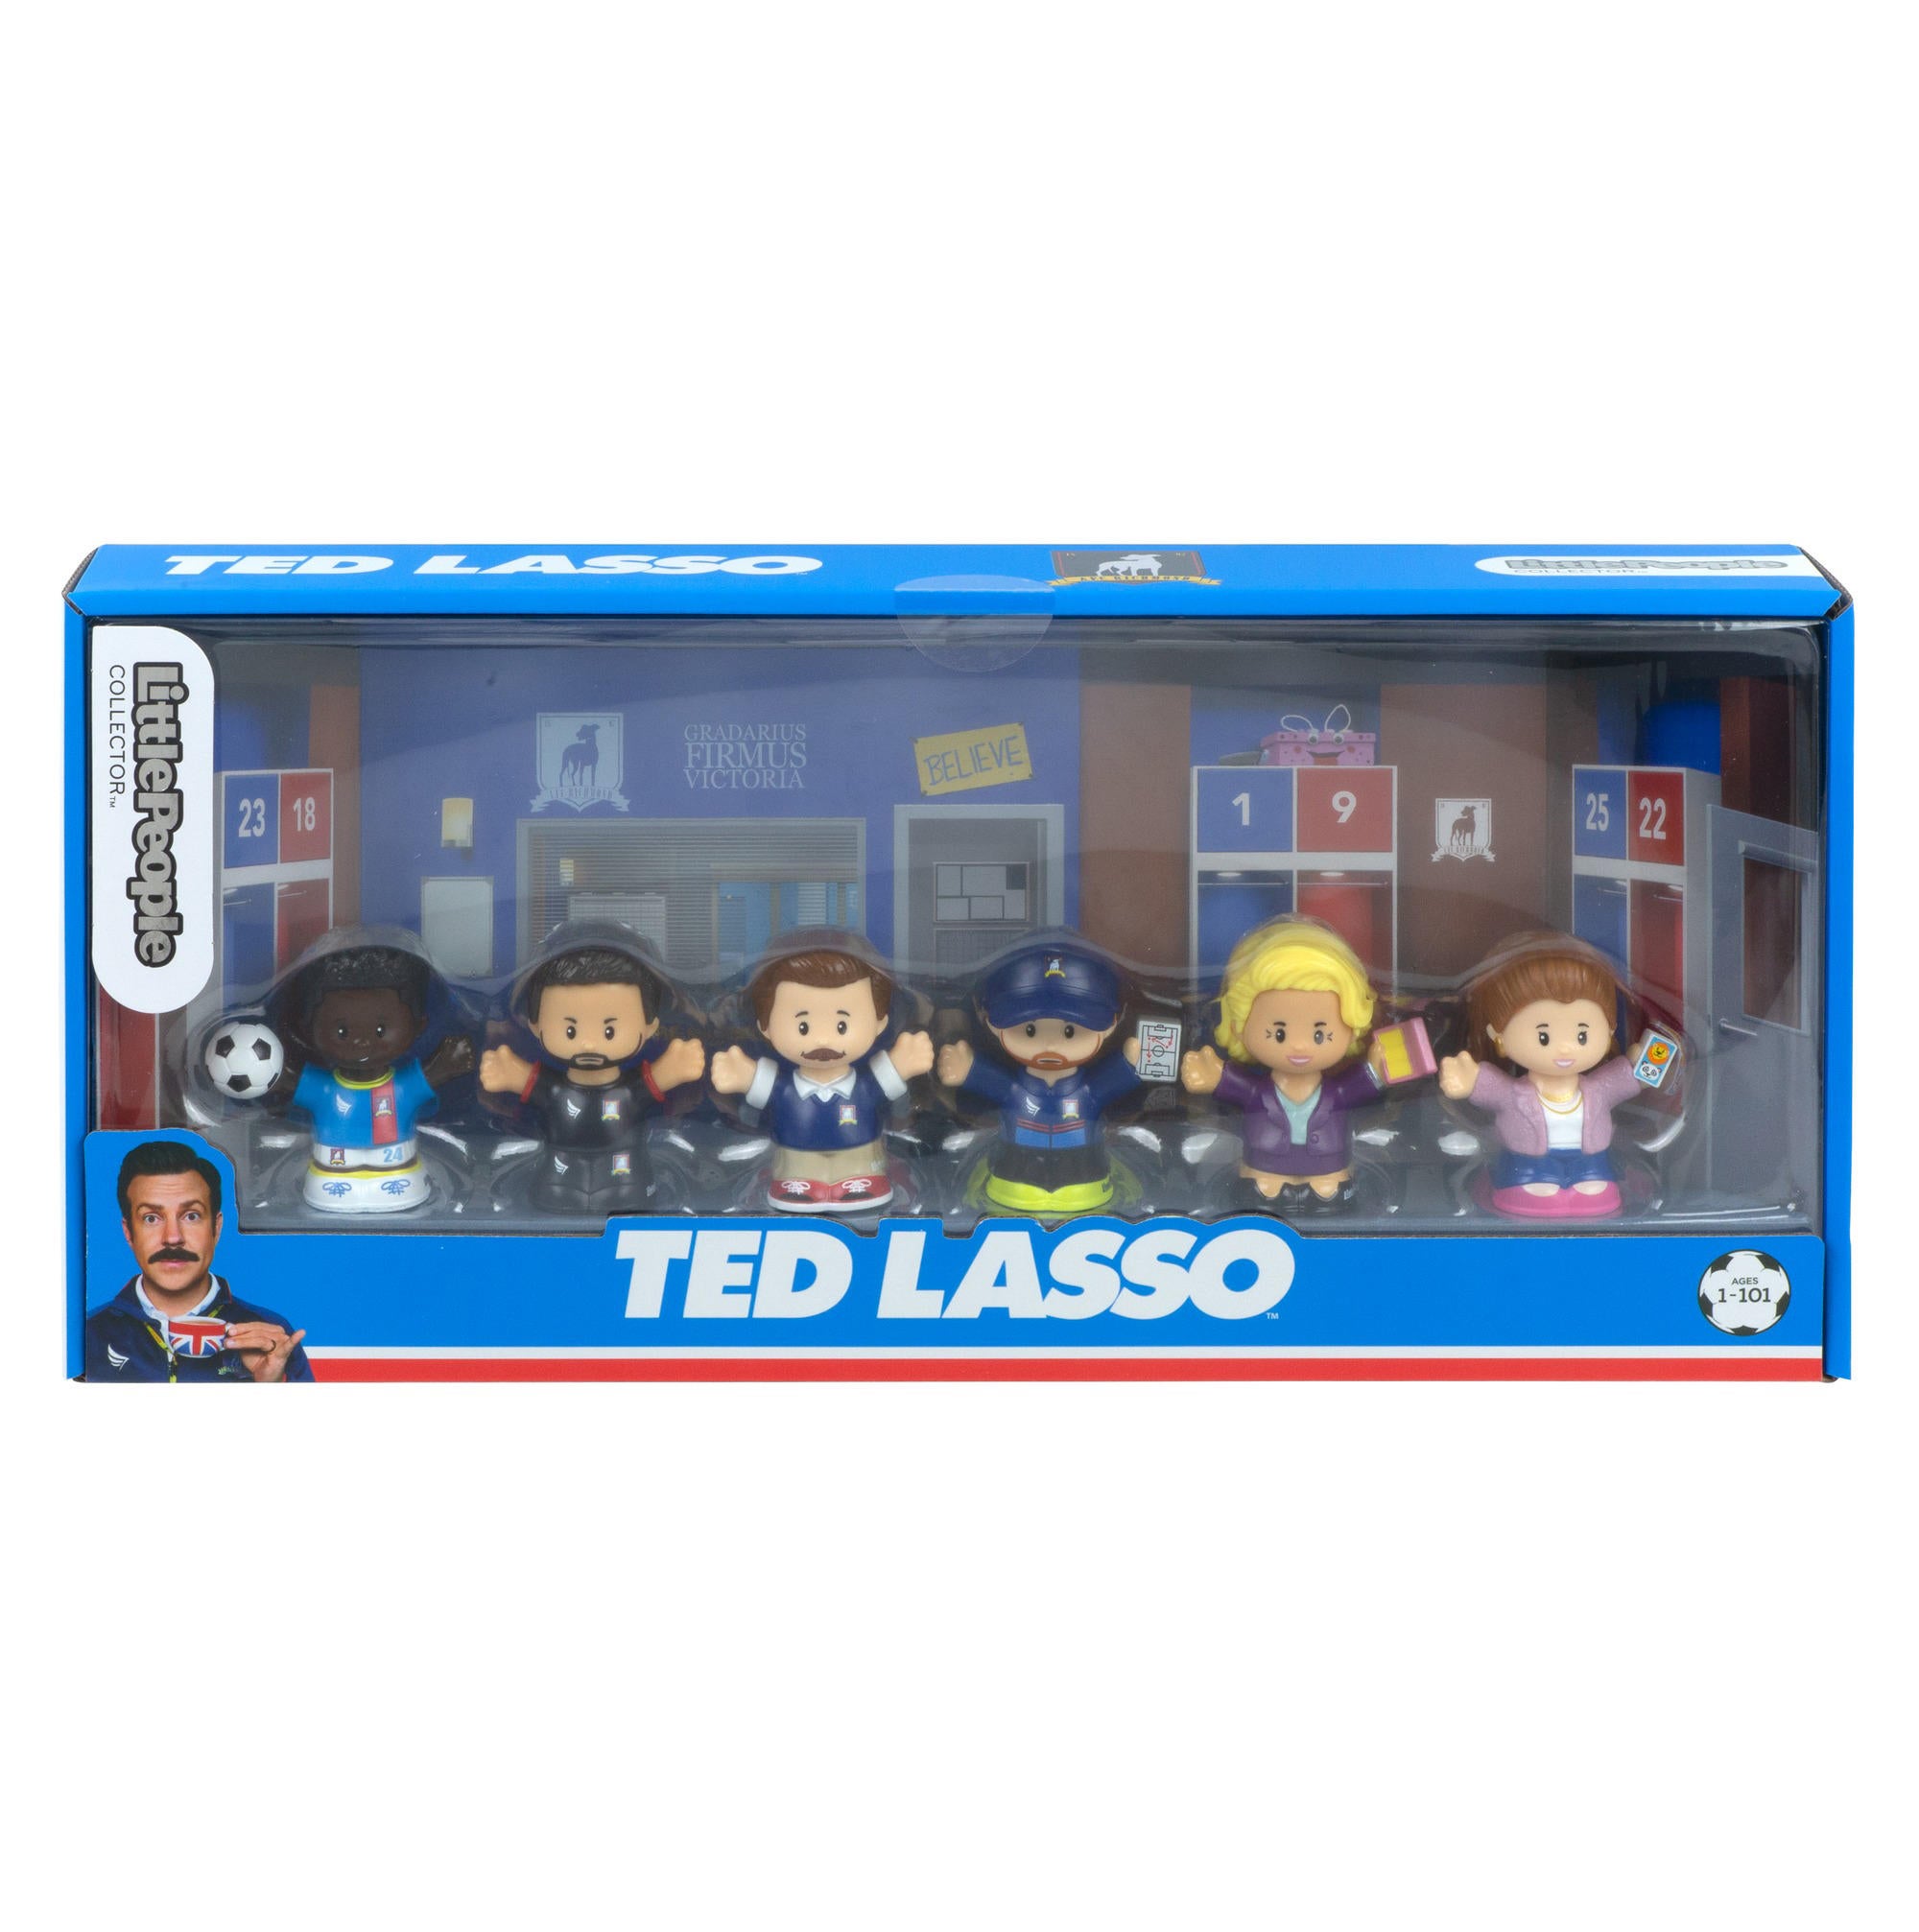 ted-lasso-lpc-packaging-front.jpg